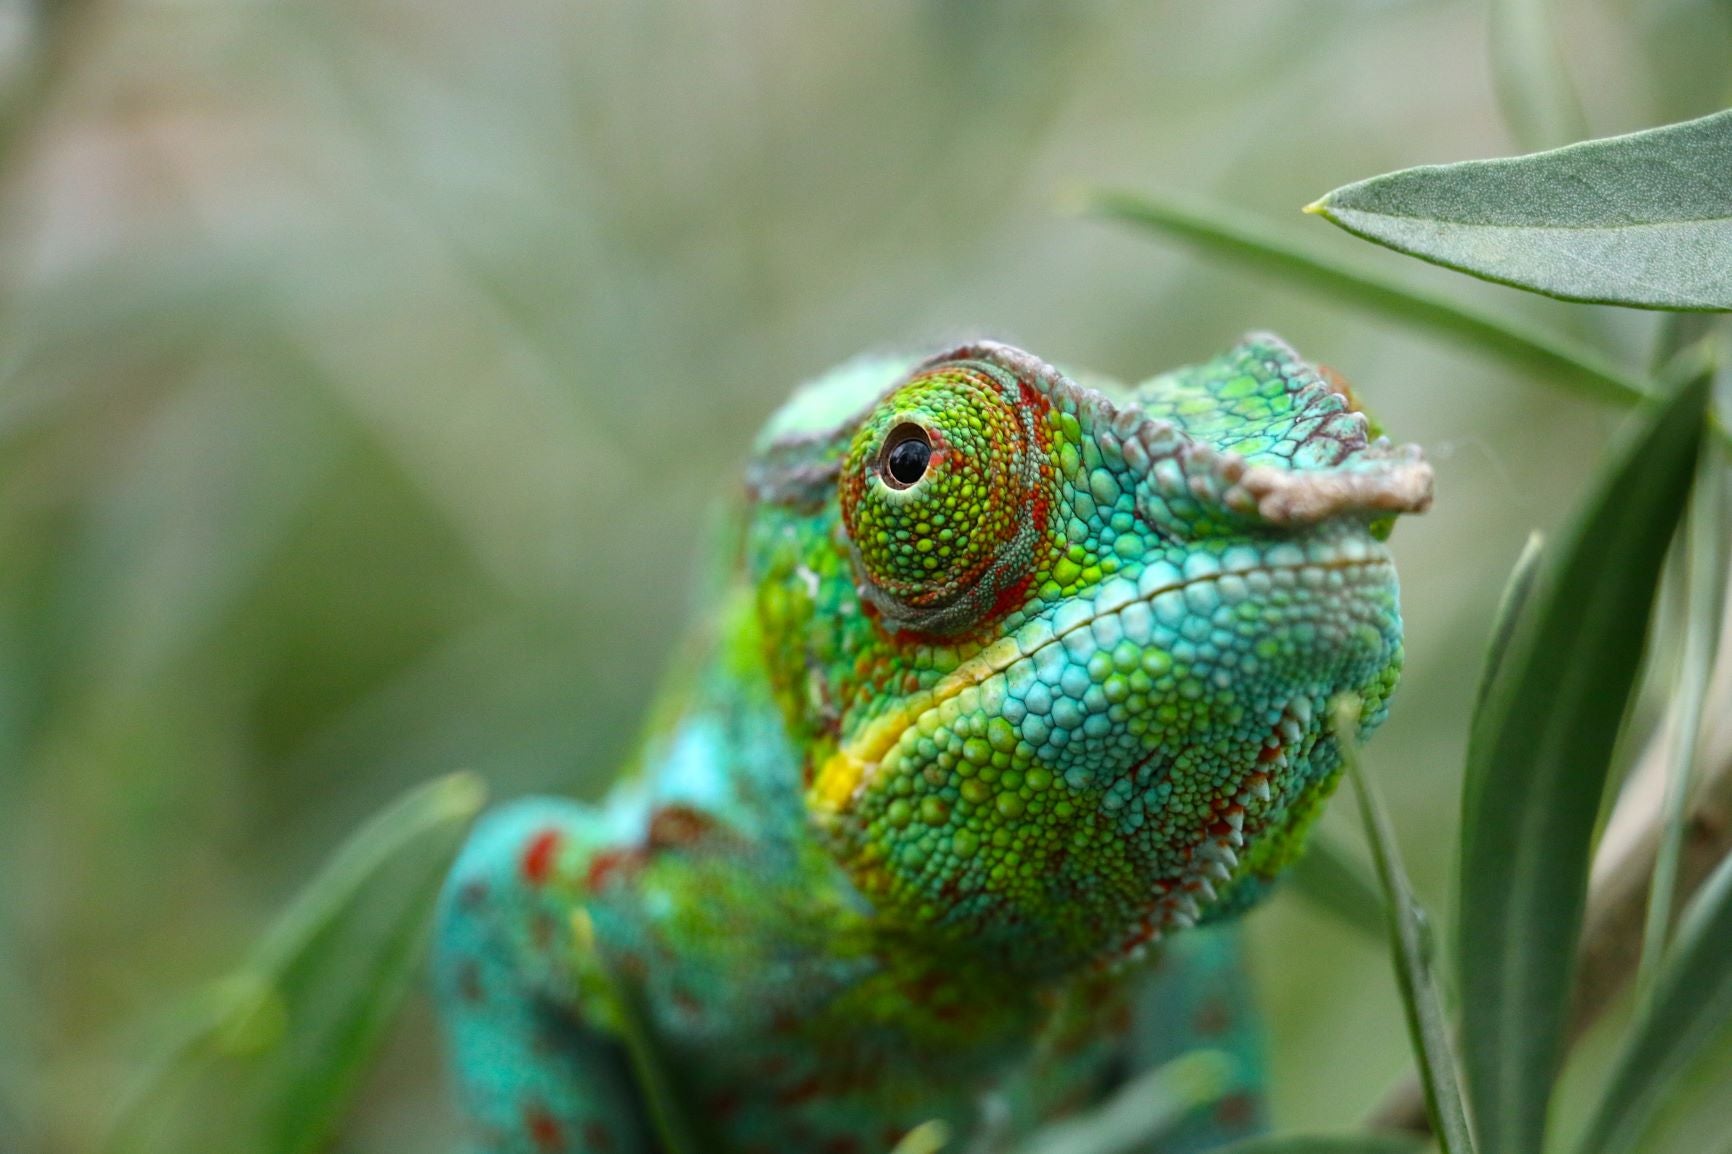 "Chameleon" Fraudsters Exploiting Companies House: Are New ID Proposals the Answer?